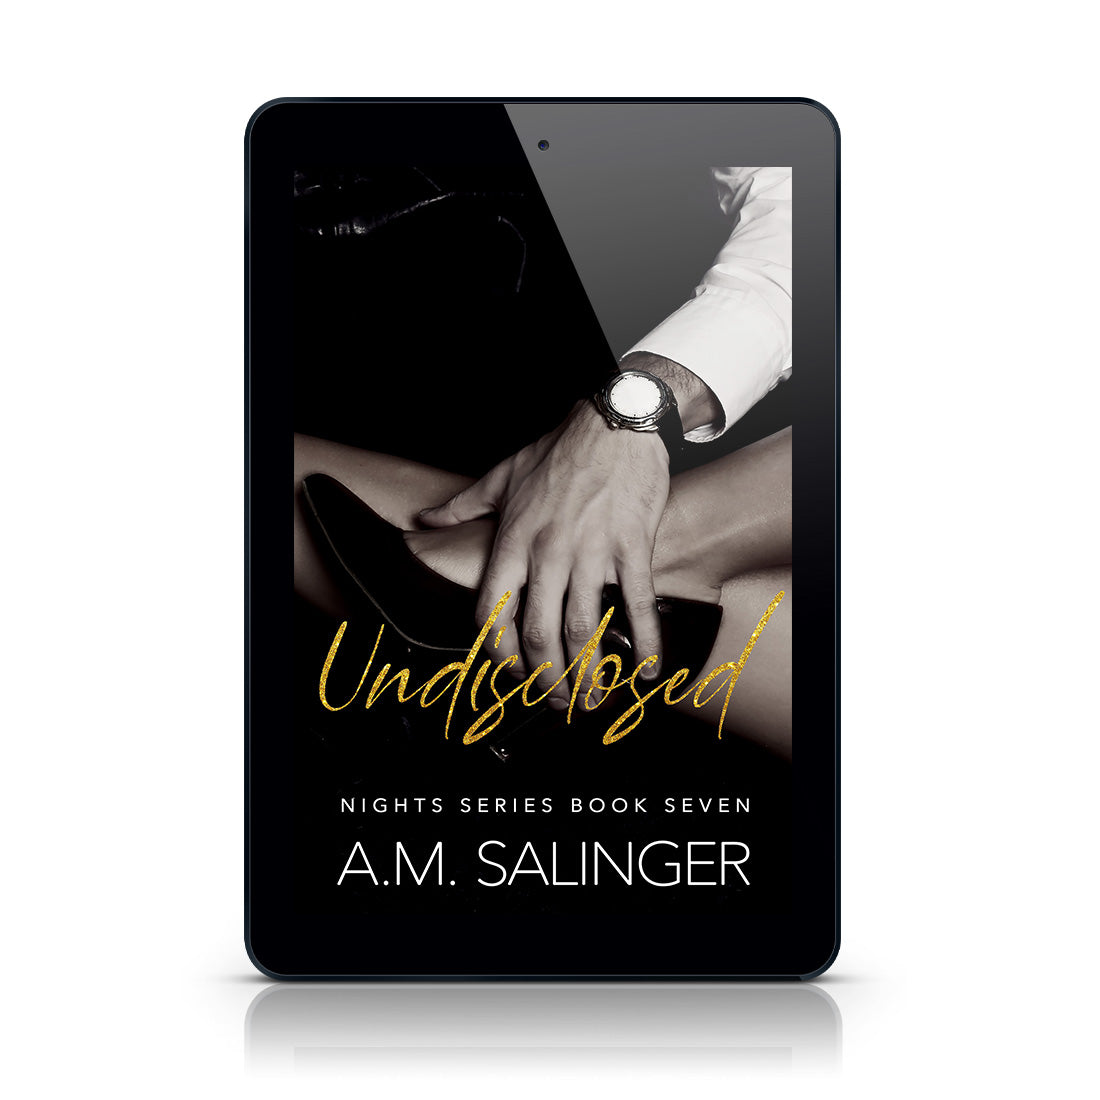 Undisclosed (Nights Series 7) EBOOK contemporary mm romance author am salinger